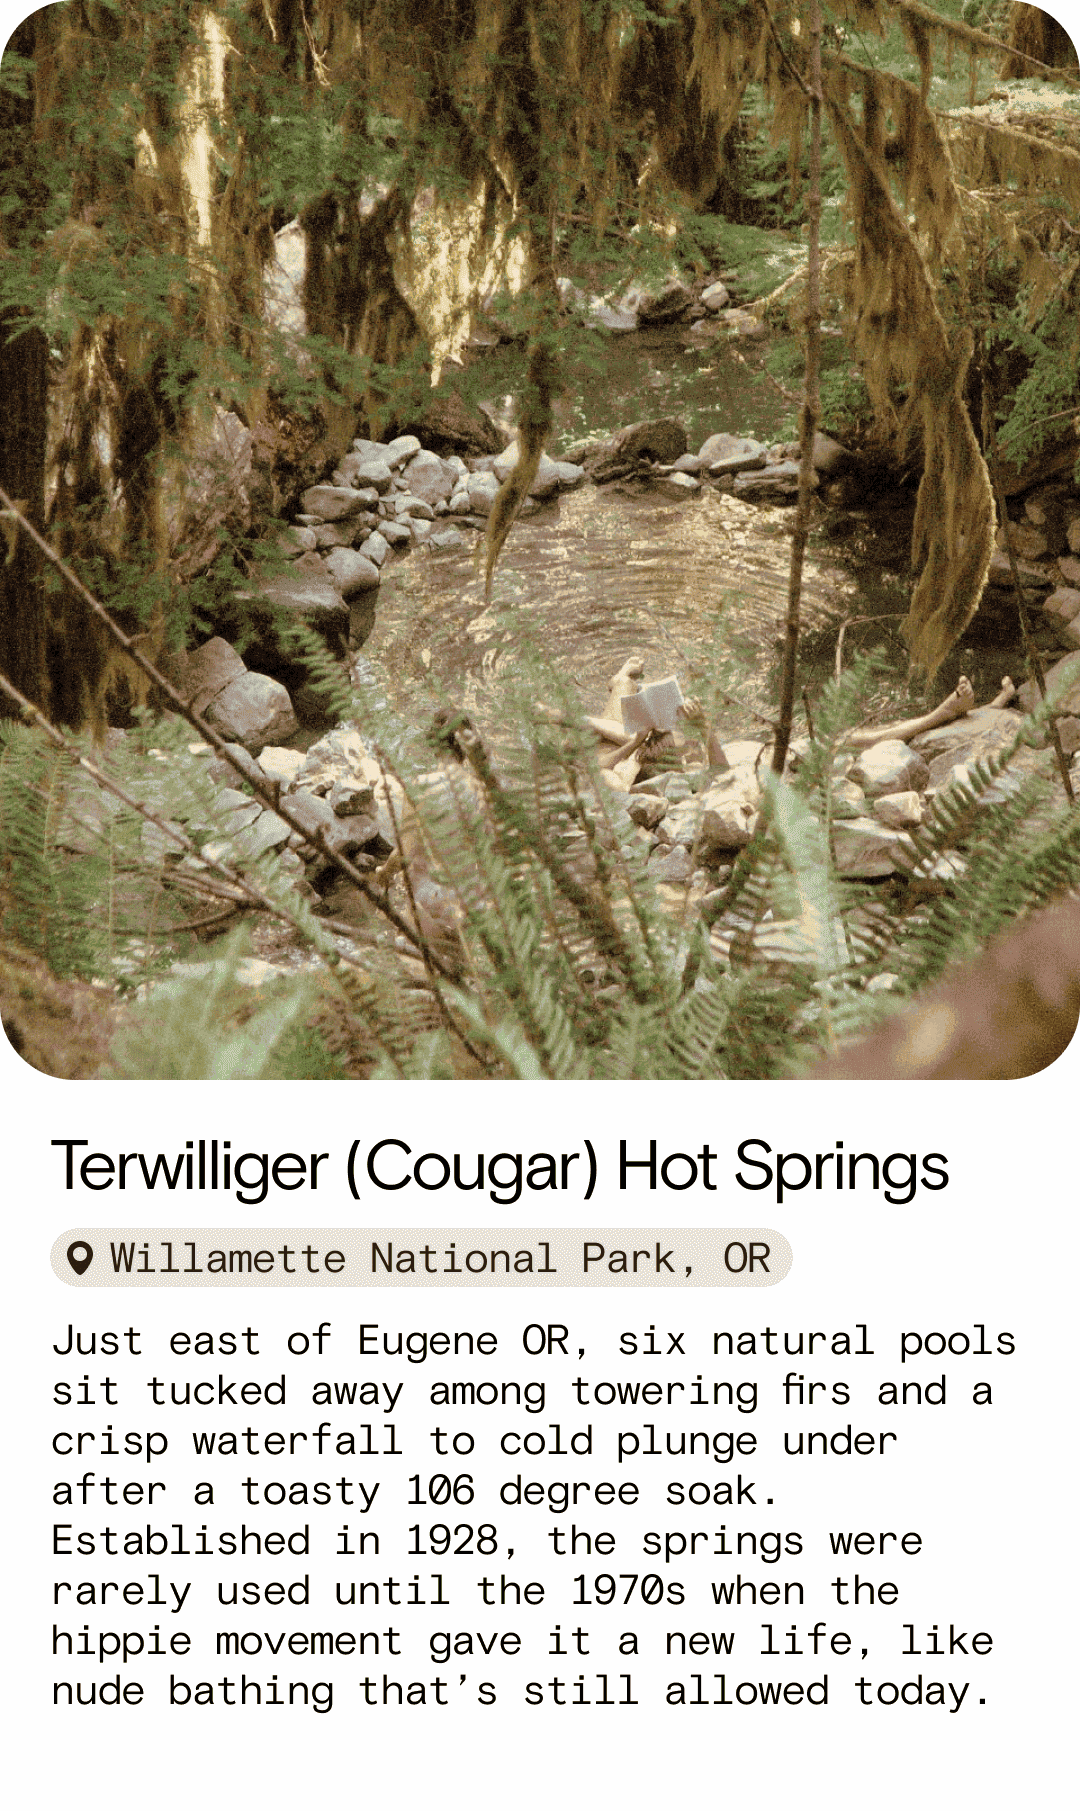 Terwilliger (Cougar) Hot Springs Willamette National Park, OR Just east of Eugene OR, six natural pools sit tucked away among towering firs and a crisp waterfall to cold plunge under after a toasty 106 degree soak. Established in 1928, the springs were rarely used until the 1970s when the hippie movement gave it a new life, like nude bathing that’s still allowed today.